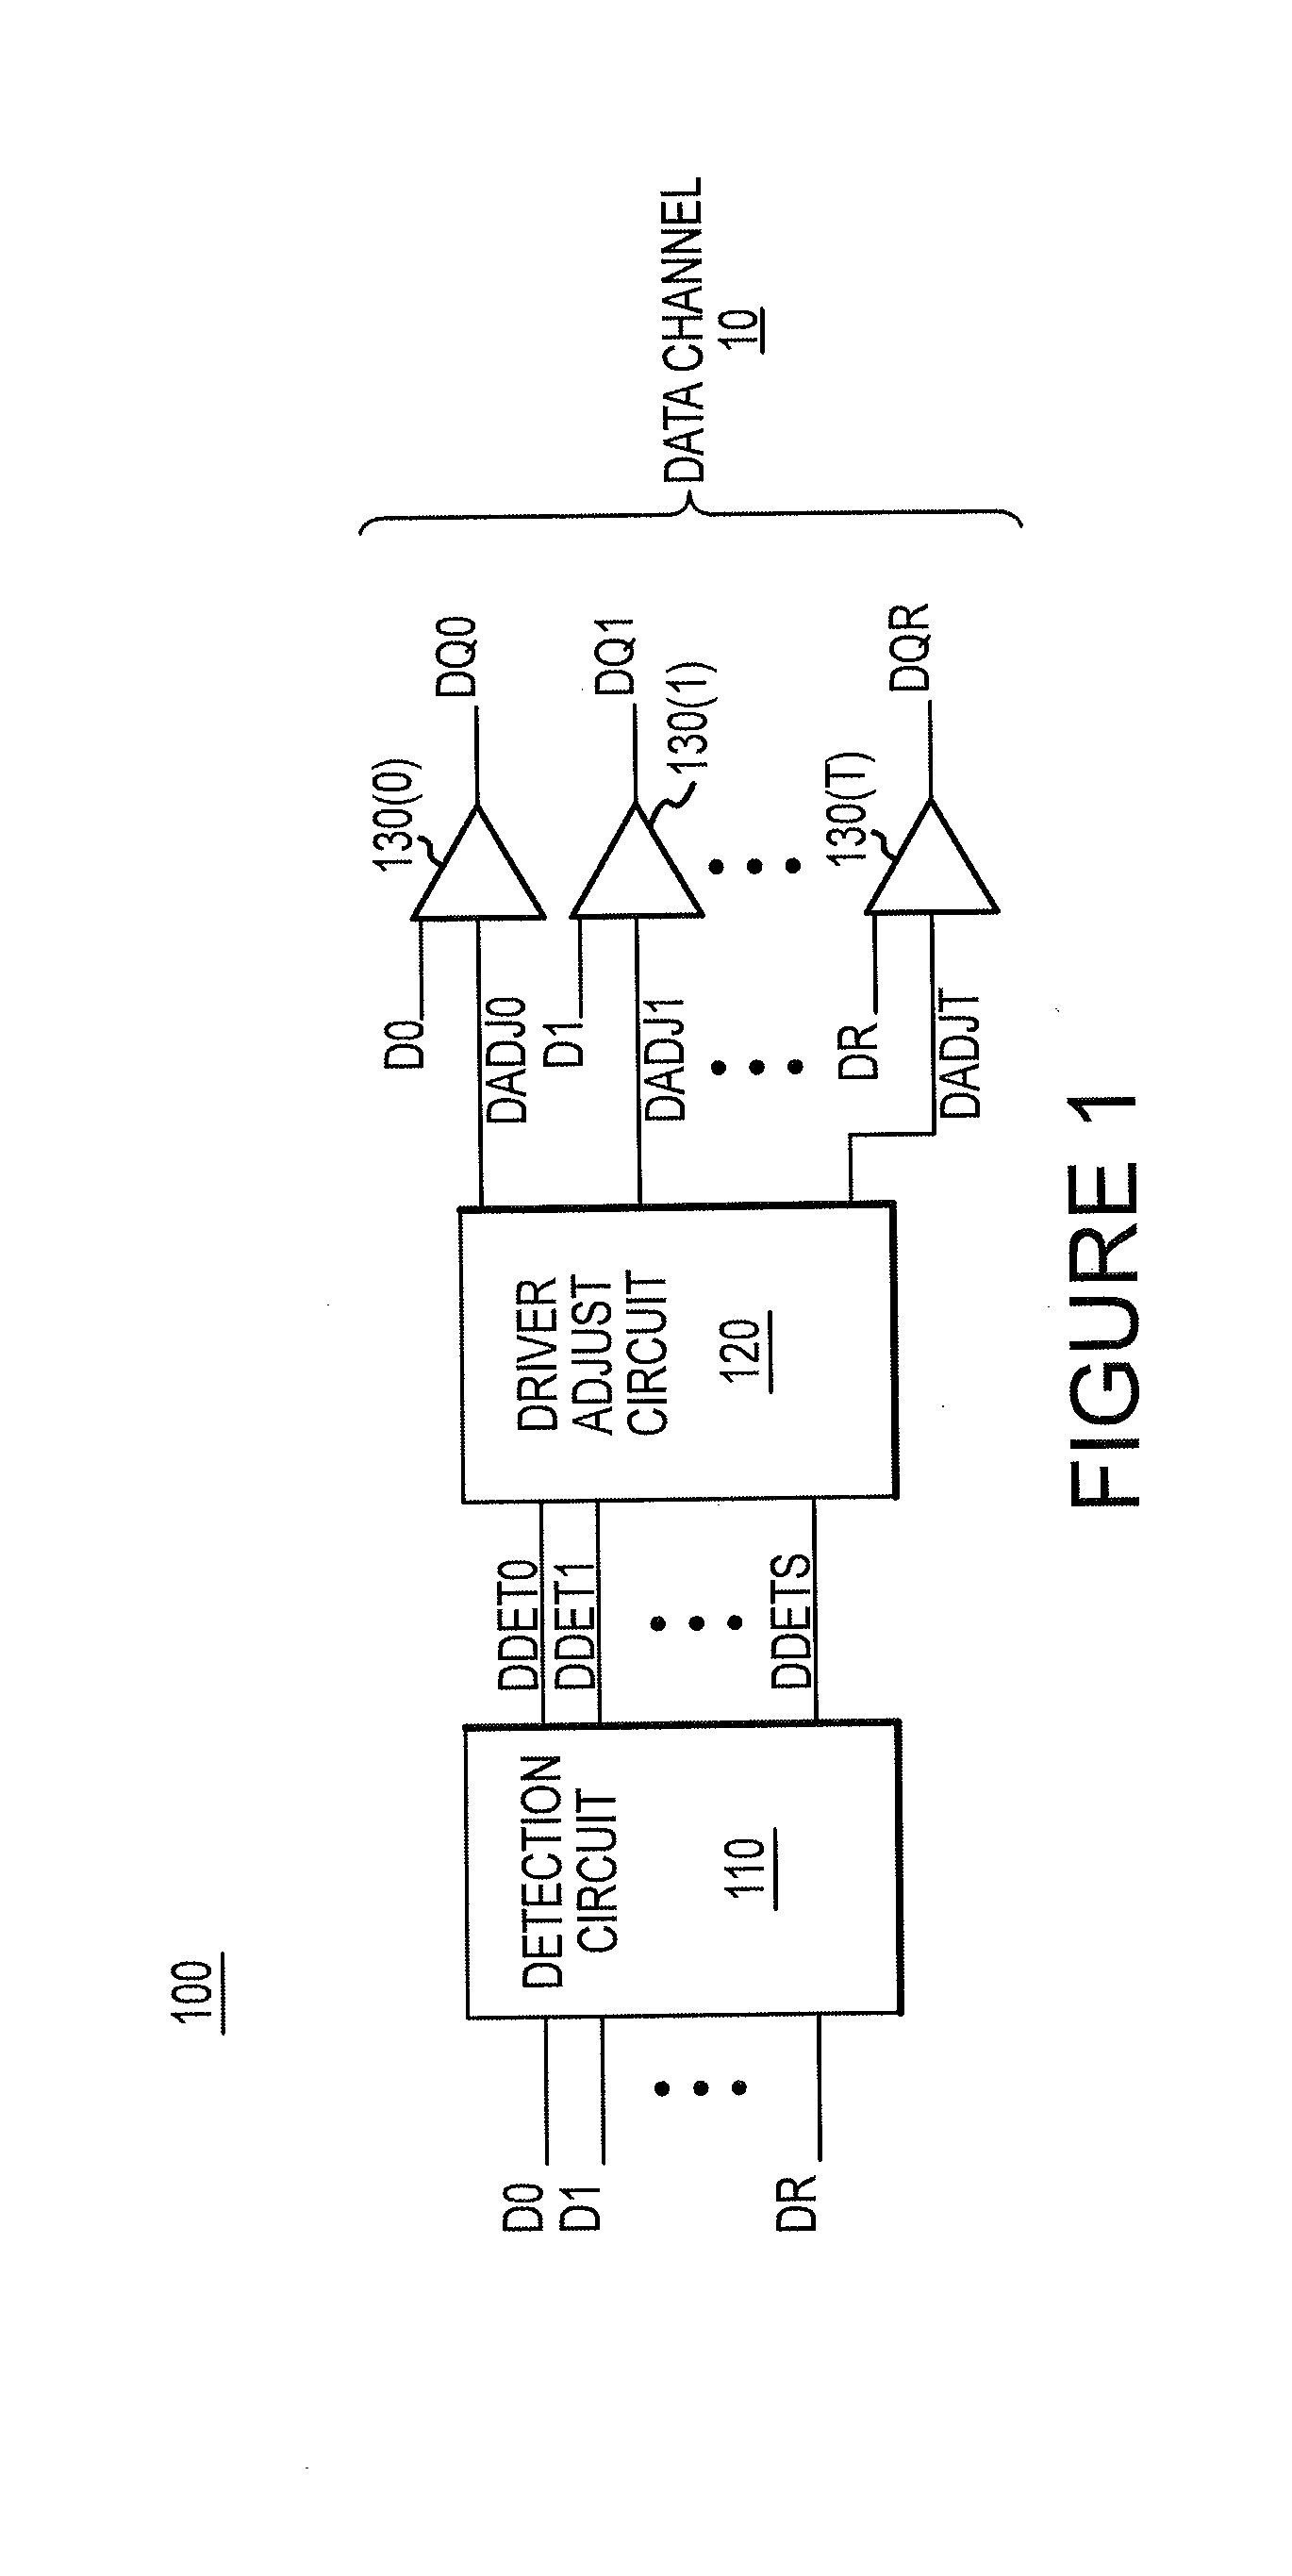 Adjustable data drivers and methods for driving data signals